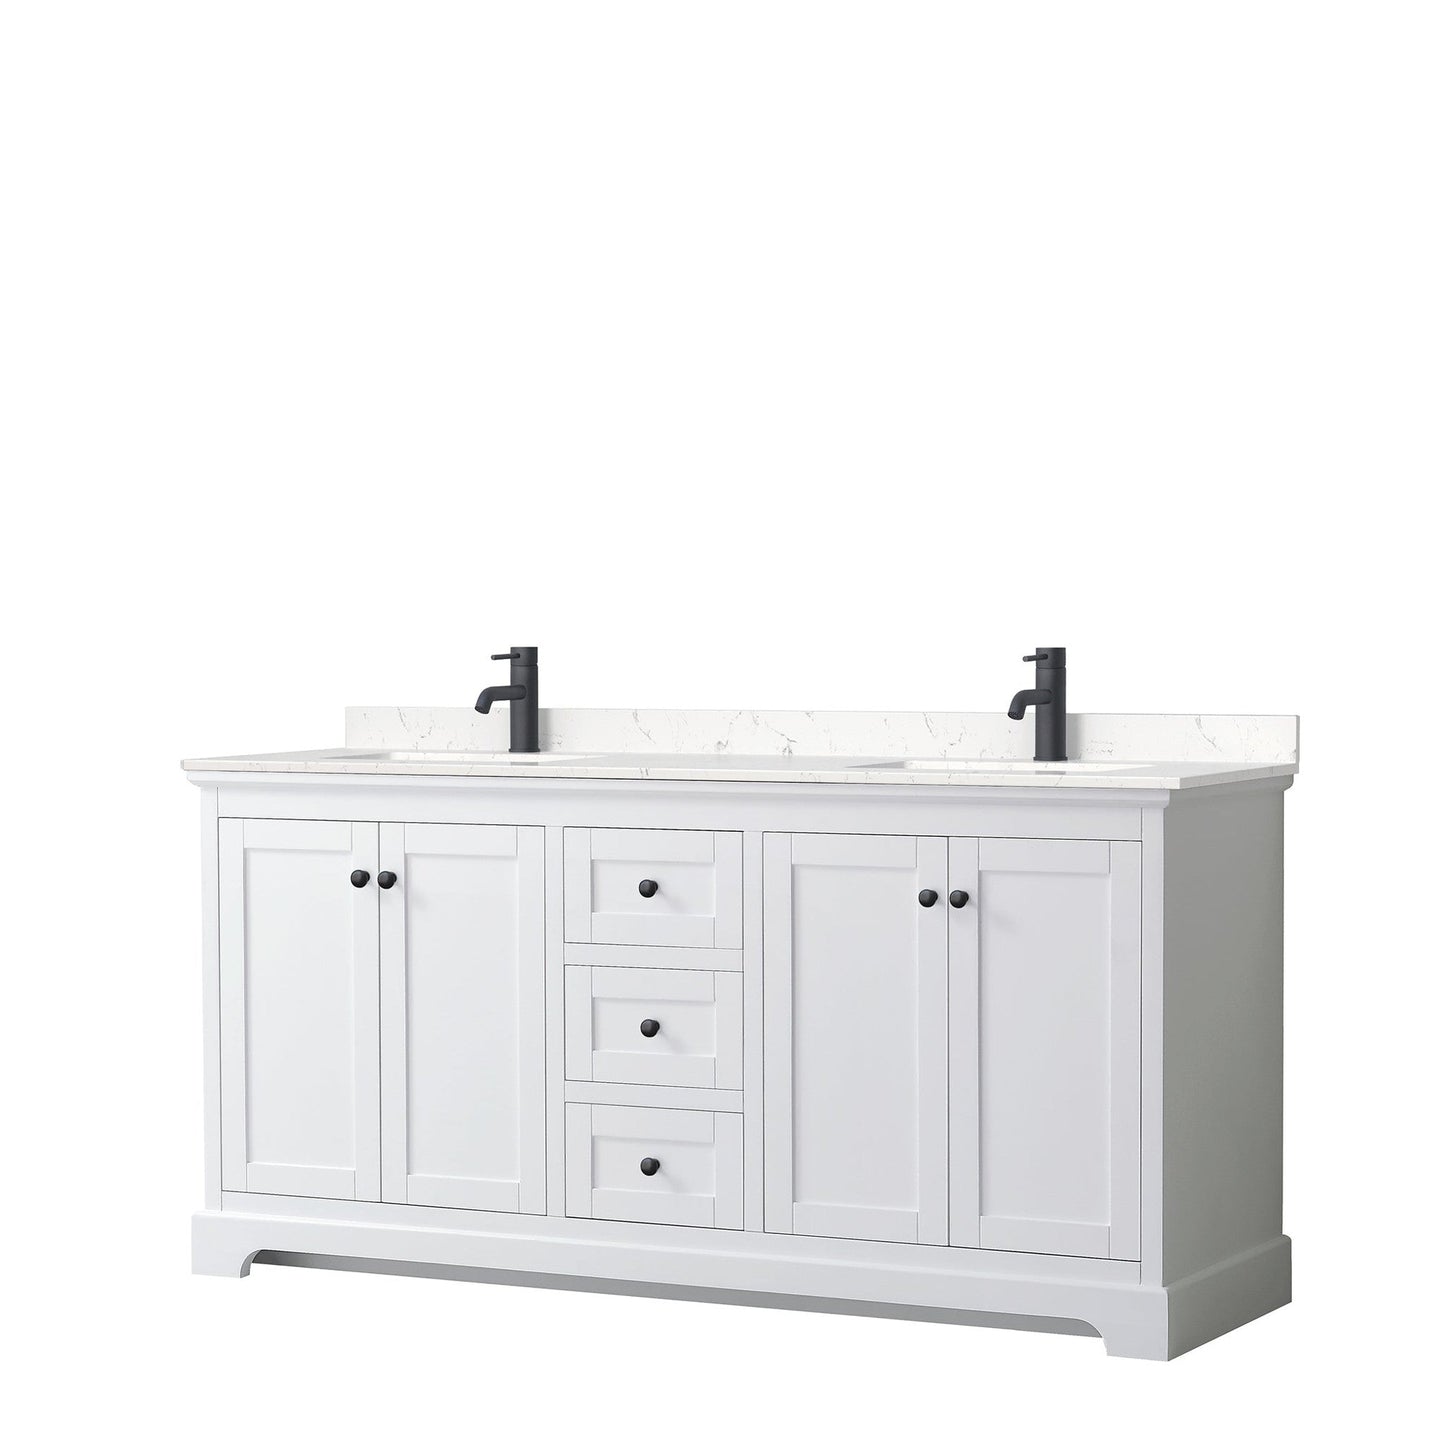 Avery 72" Double Bathroom Vanity in White, Carrara Cultured Marble Countertop, Undermount Square Sinks, Matte Black Trim